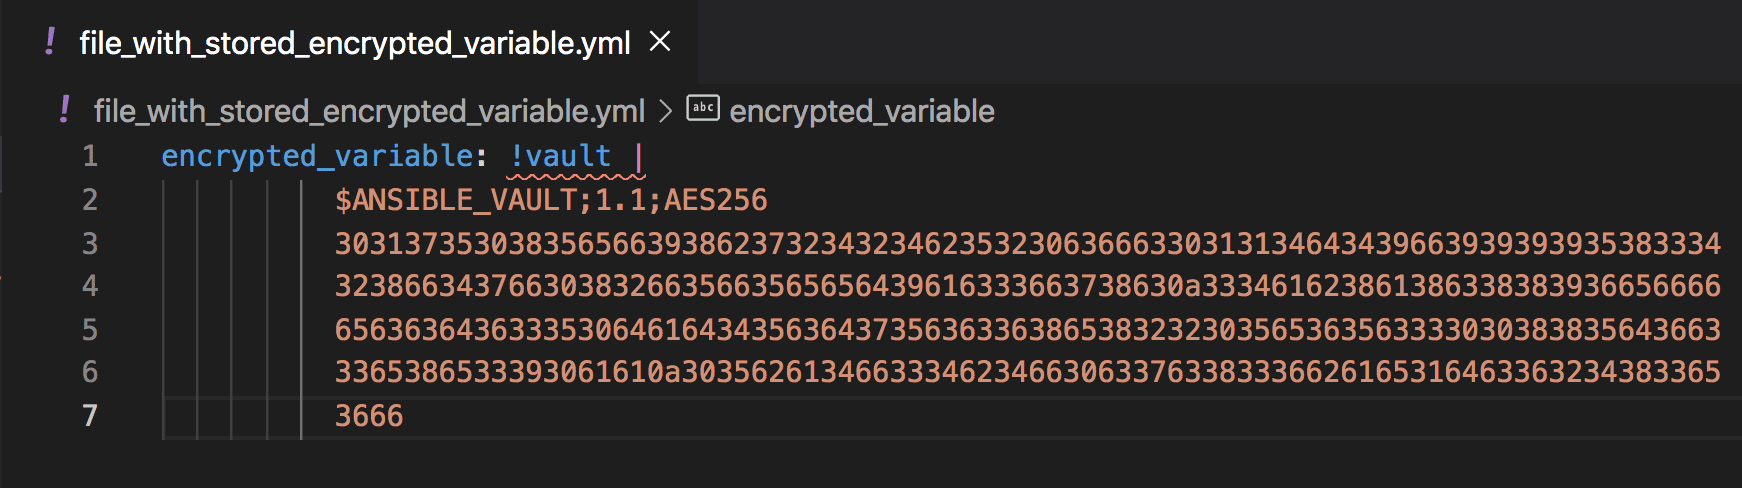 ansible vault store variable in a file